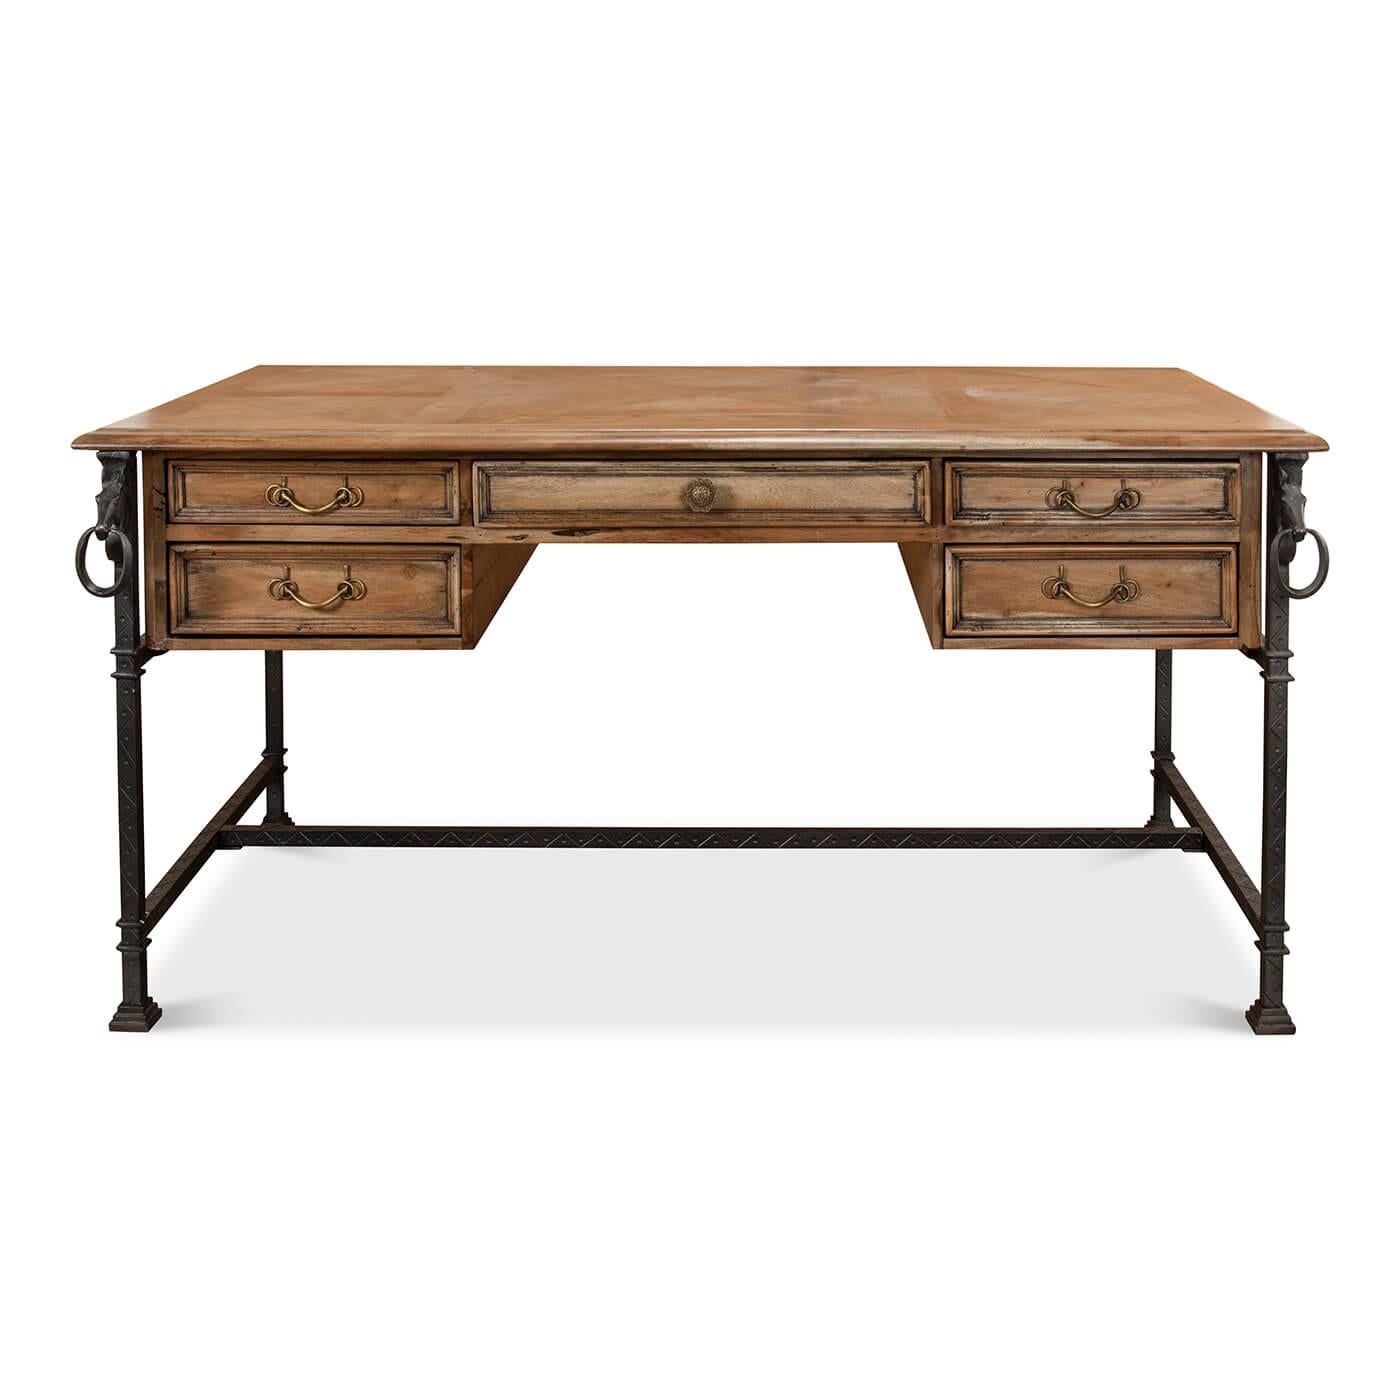 The Industrial Equestrian desk of walnut and reclaimed wood with an iron base. The parquetry inlaid top with five drawers is flanked by two horse heads and raised on a textured iron H-stretcher base.

Dimensions: 62